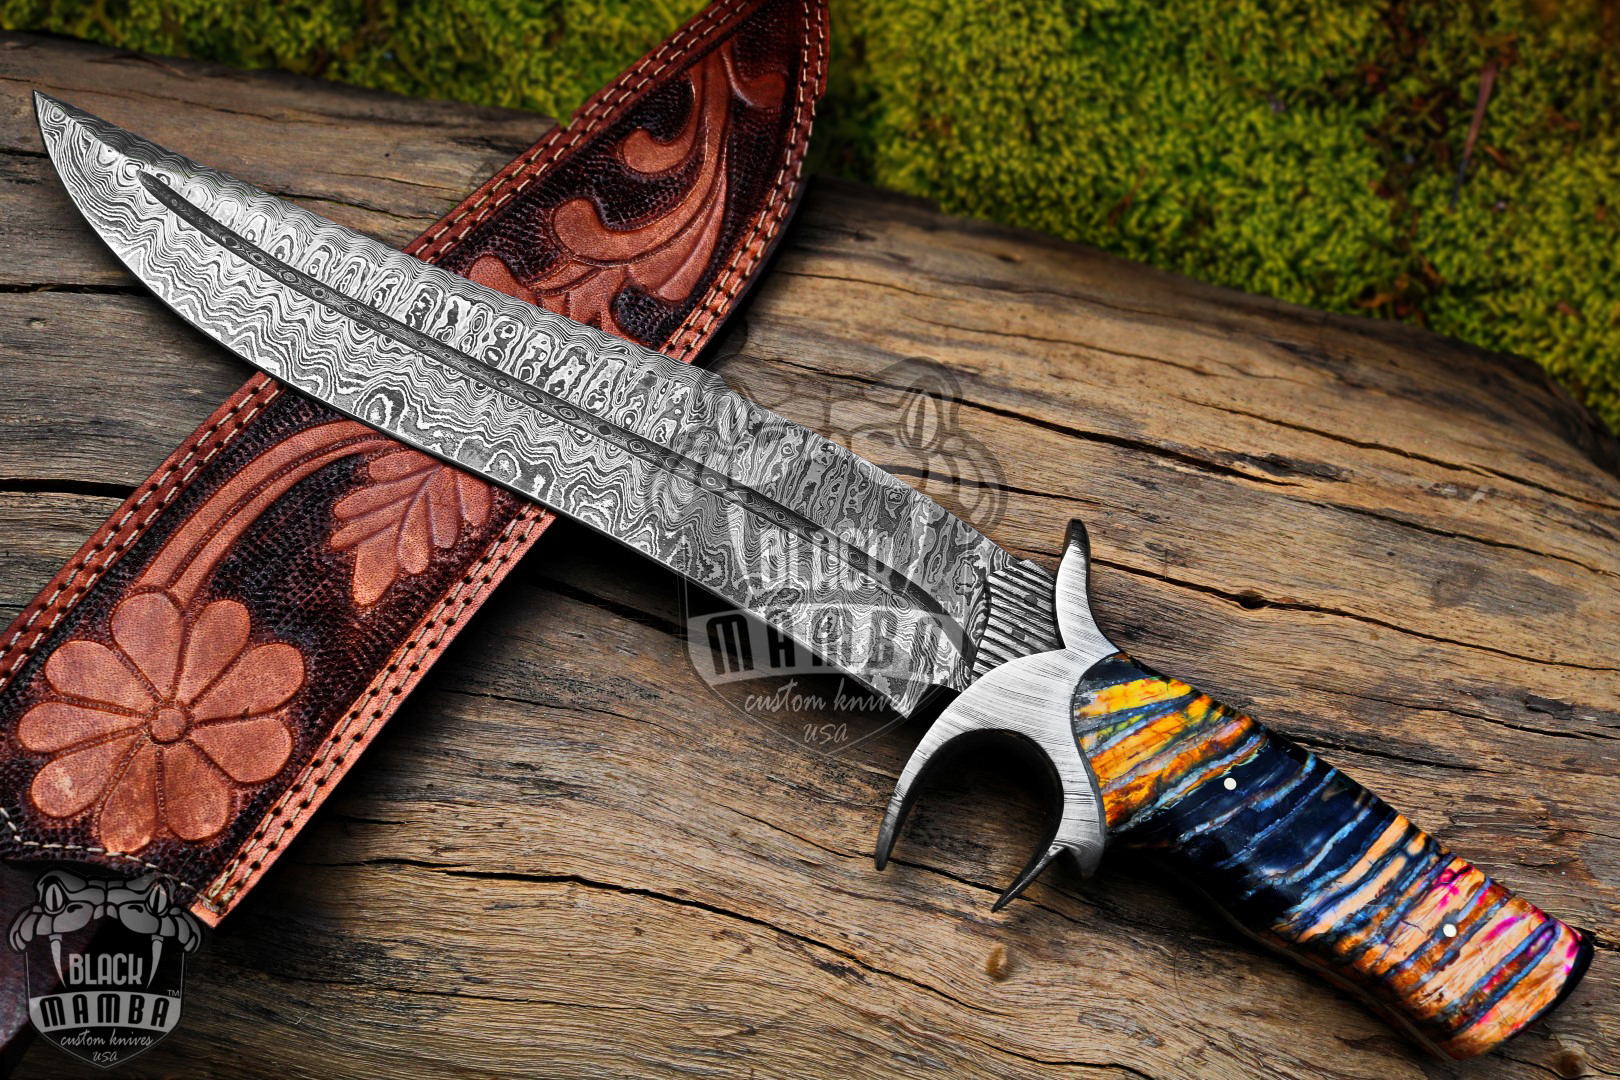 Bowie Knife - Handmade Forged Bowie Hunting Knife - Damascus Steel